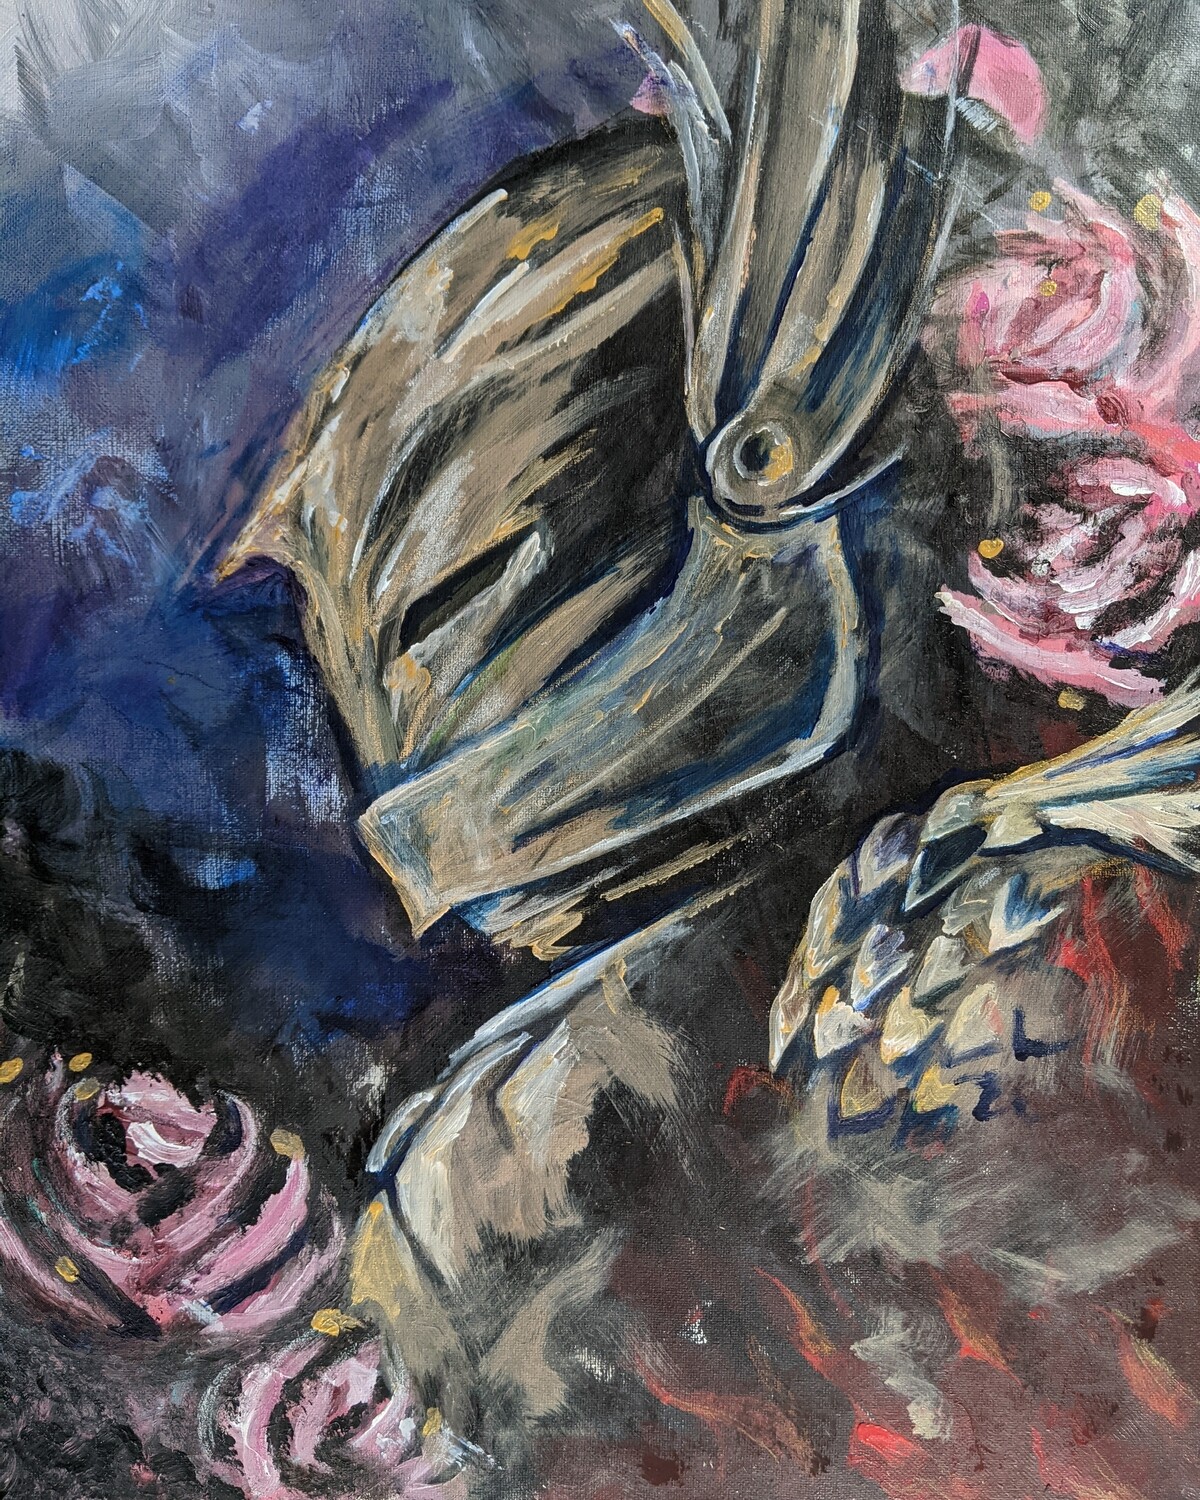 Guardian fantasy painting roses armor suit of armor knight